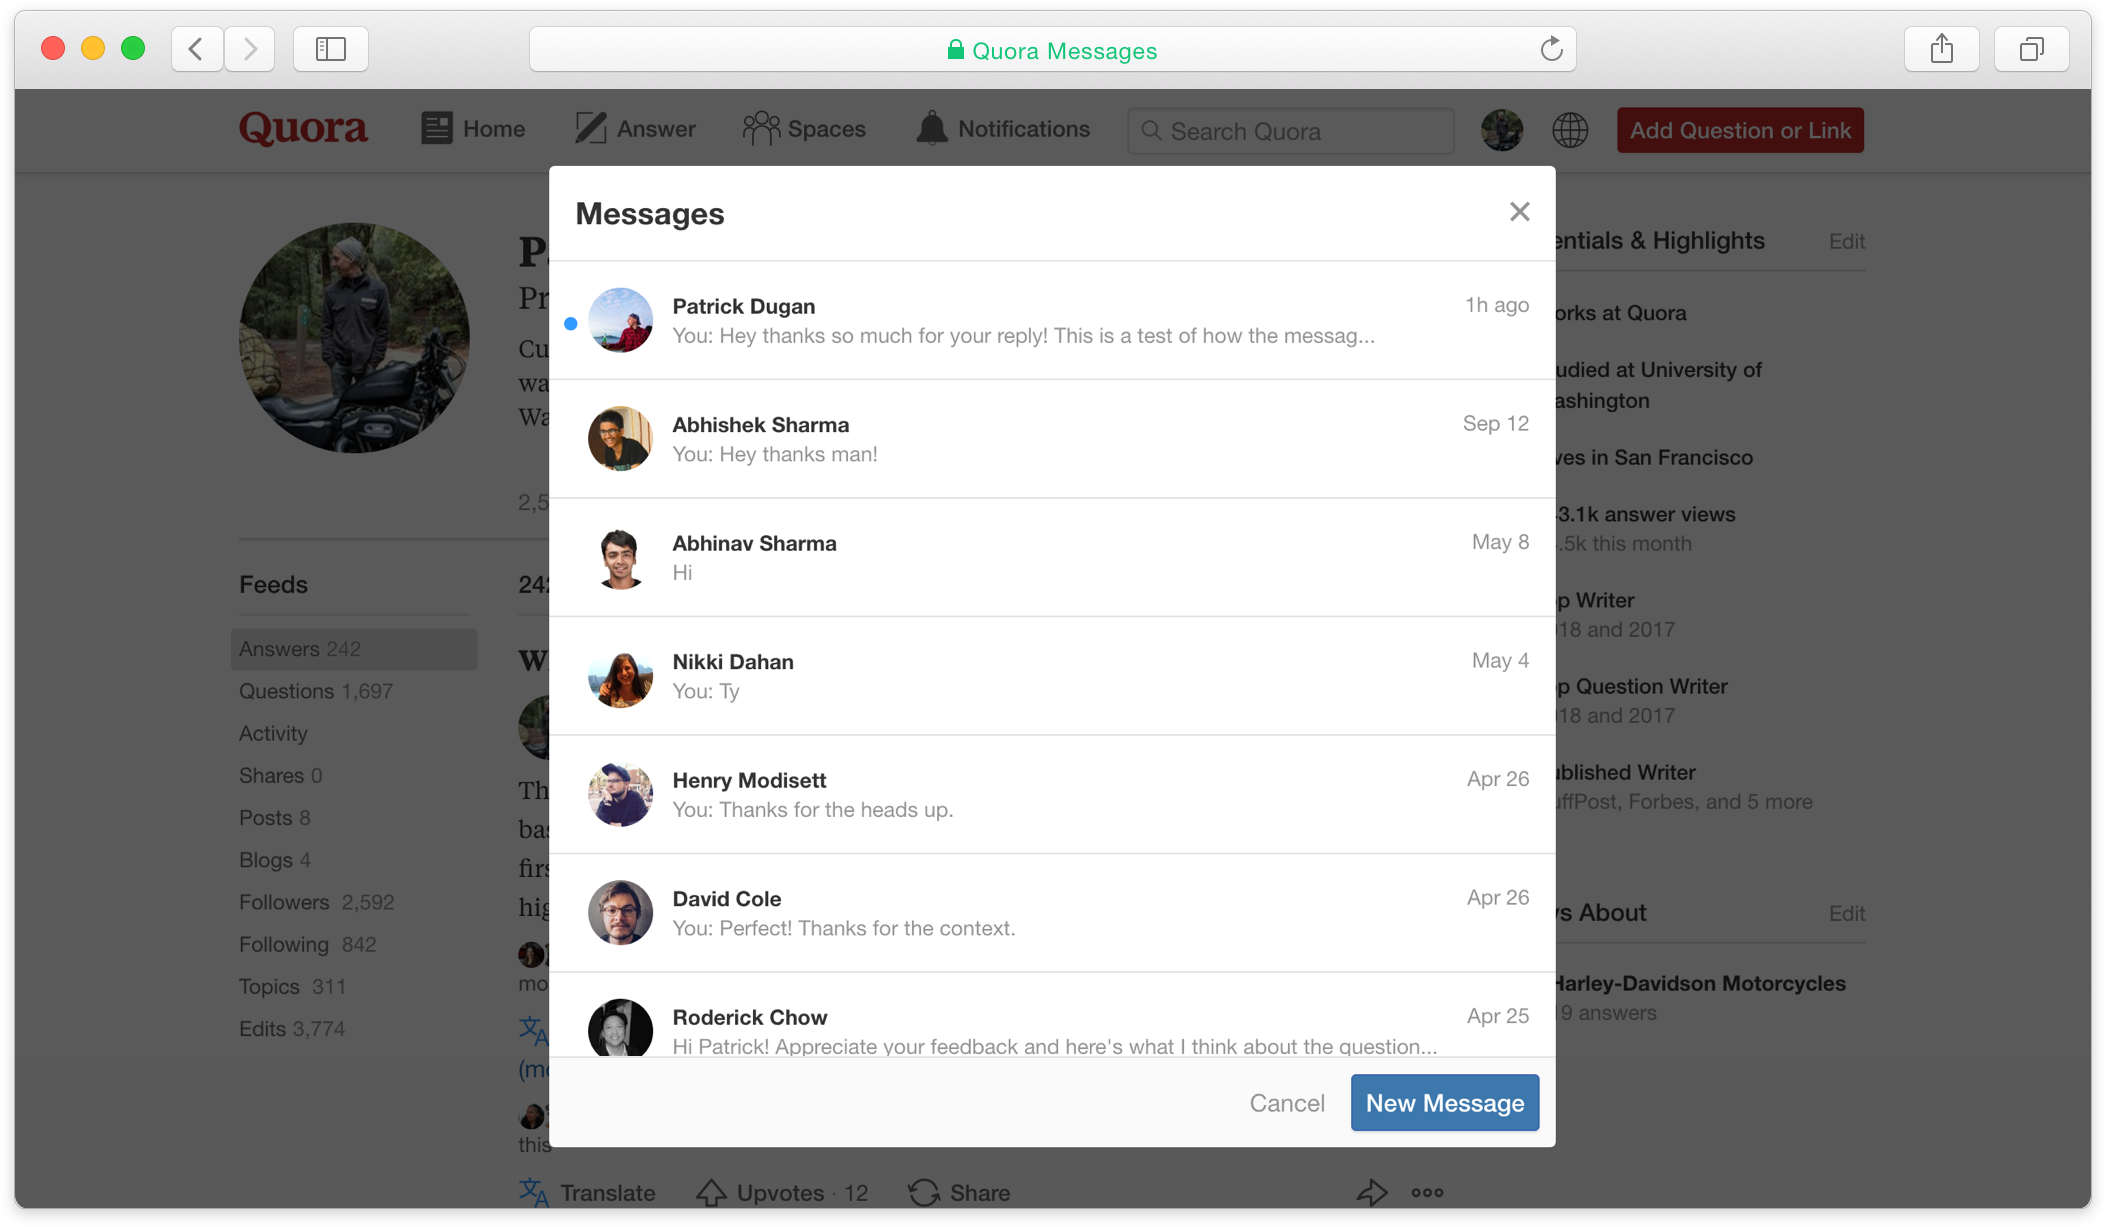 The main screen for Quora Messages on desktop.